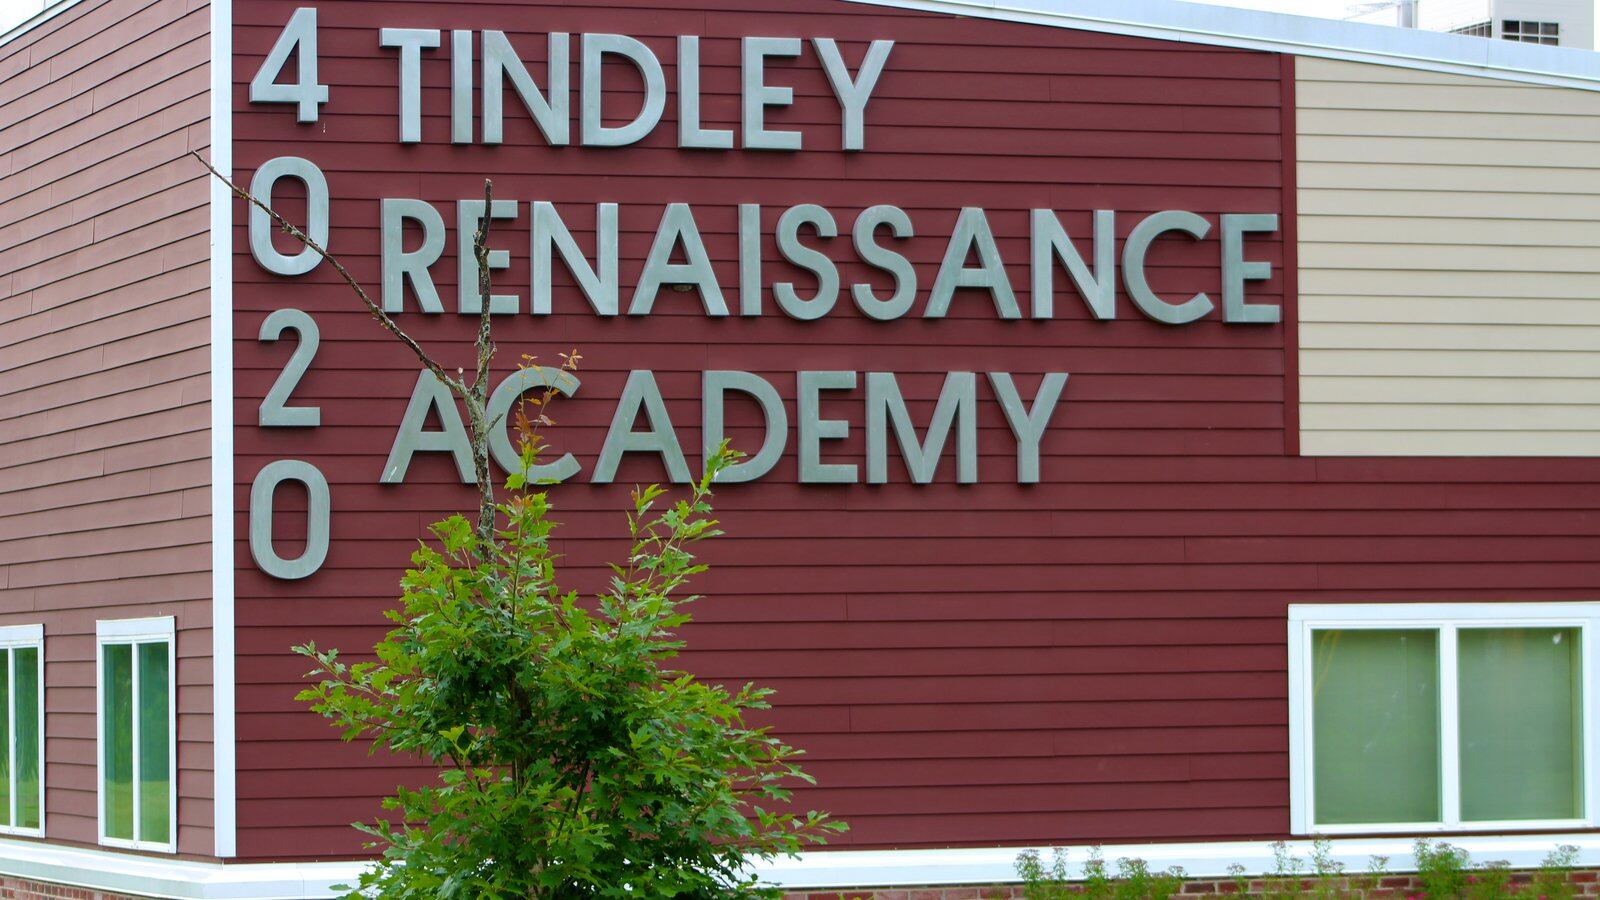 Tindley Renaissance Academy, one of three elementary schools in the Tindley Accelerated Schools Network, sits on the east side of Indianapolis.